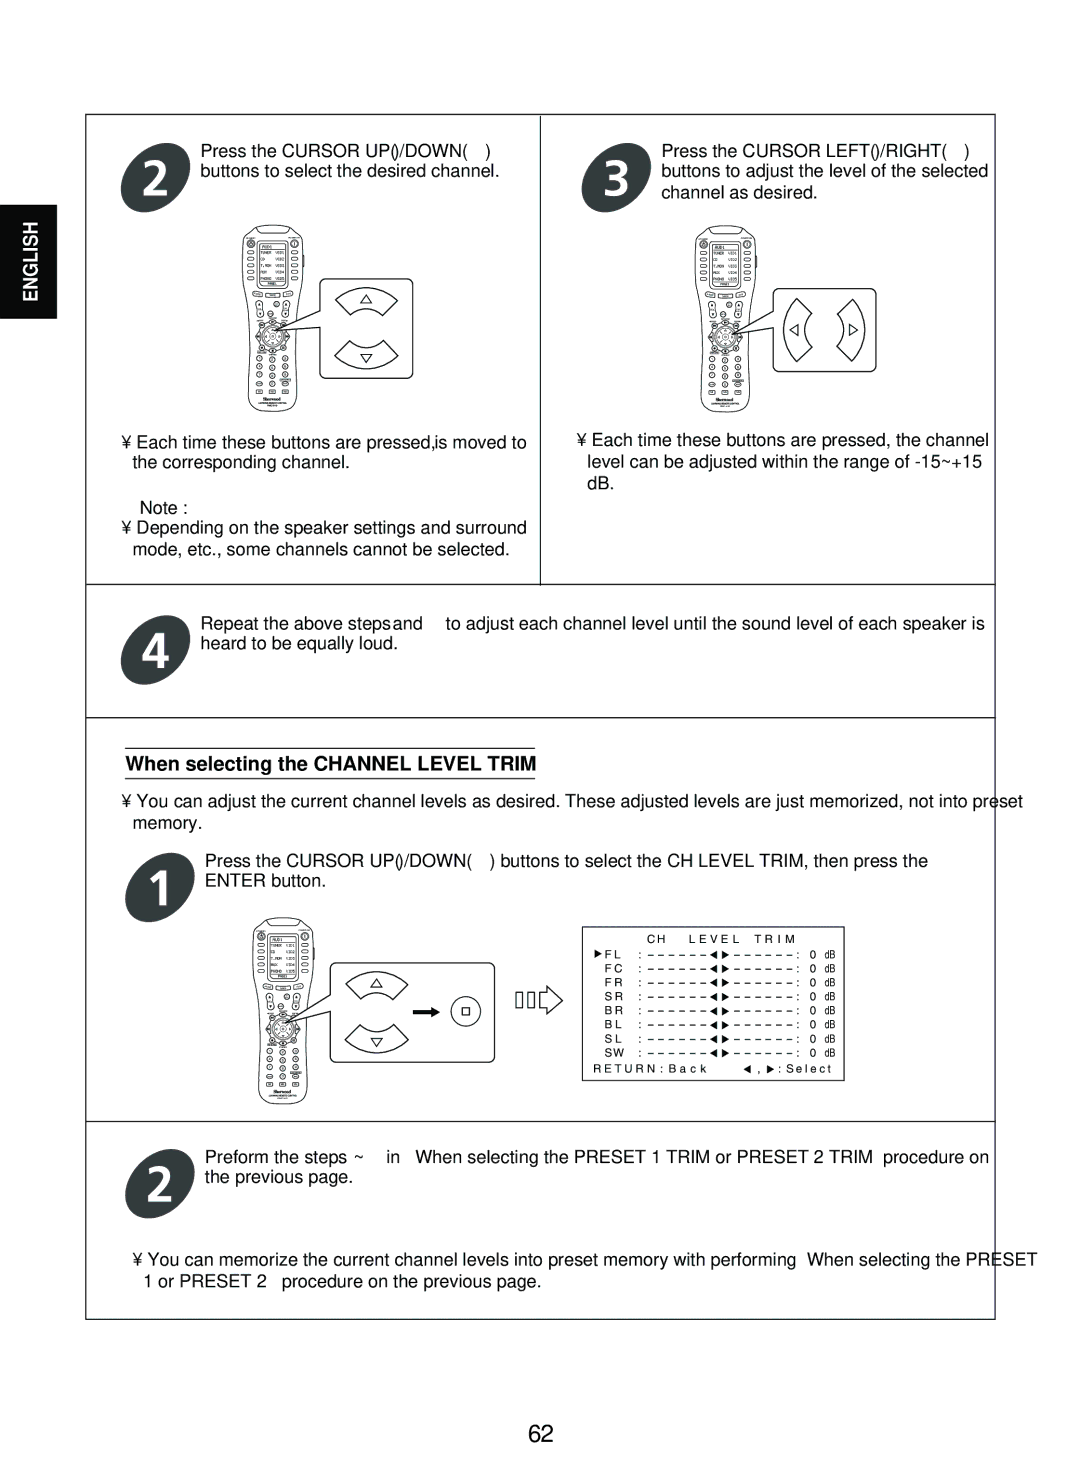 Sherwood P-965 manual When selecting the Channel Level Trim 